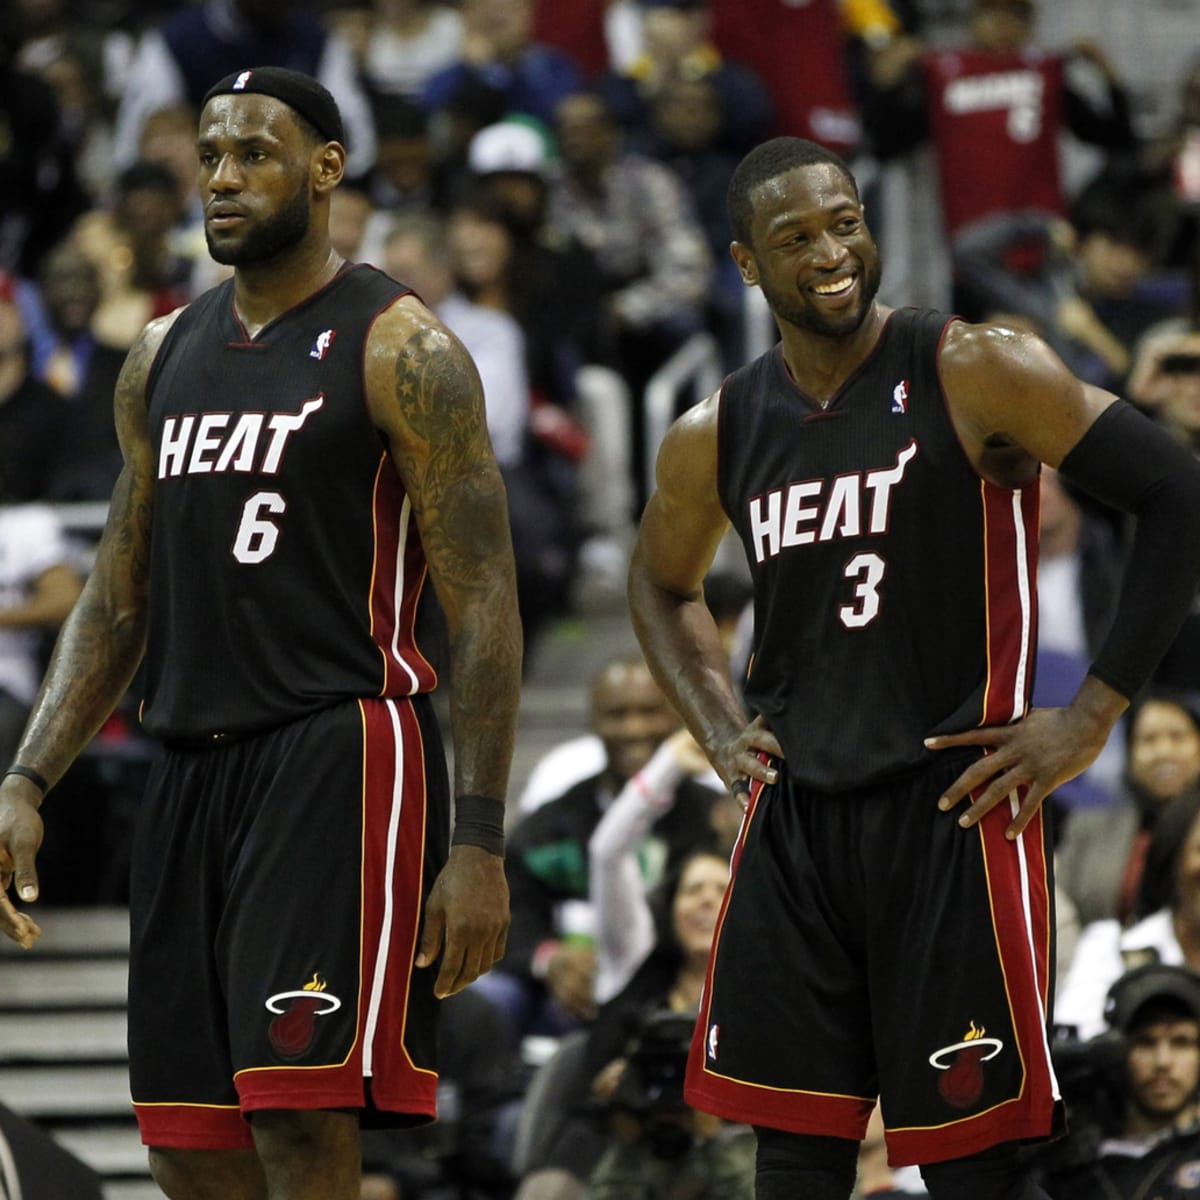 Miami Heat: Why Does LeBron Still Refuse To Acknowledge Time Here?